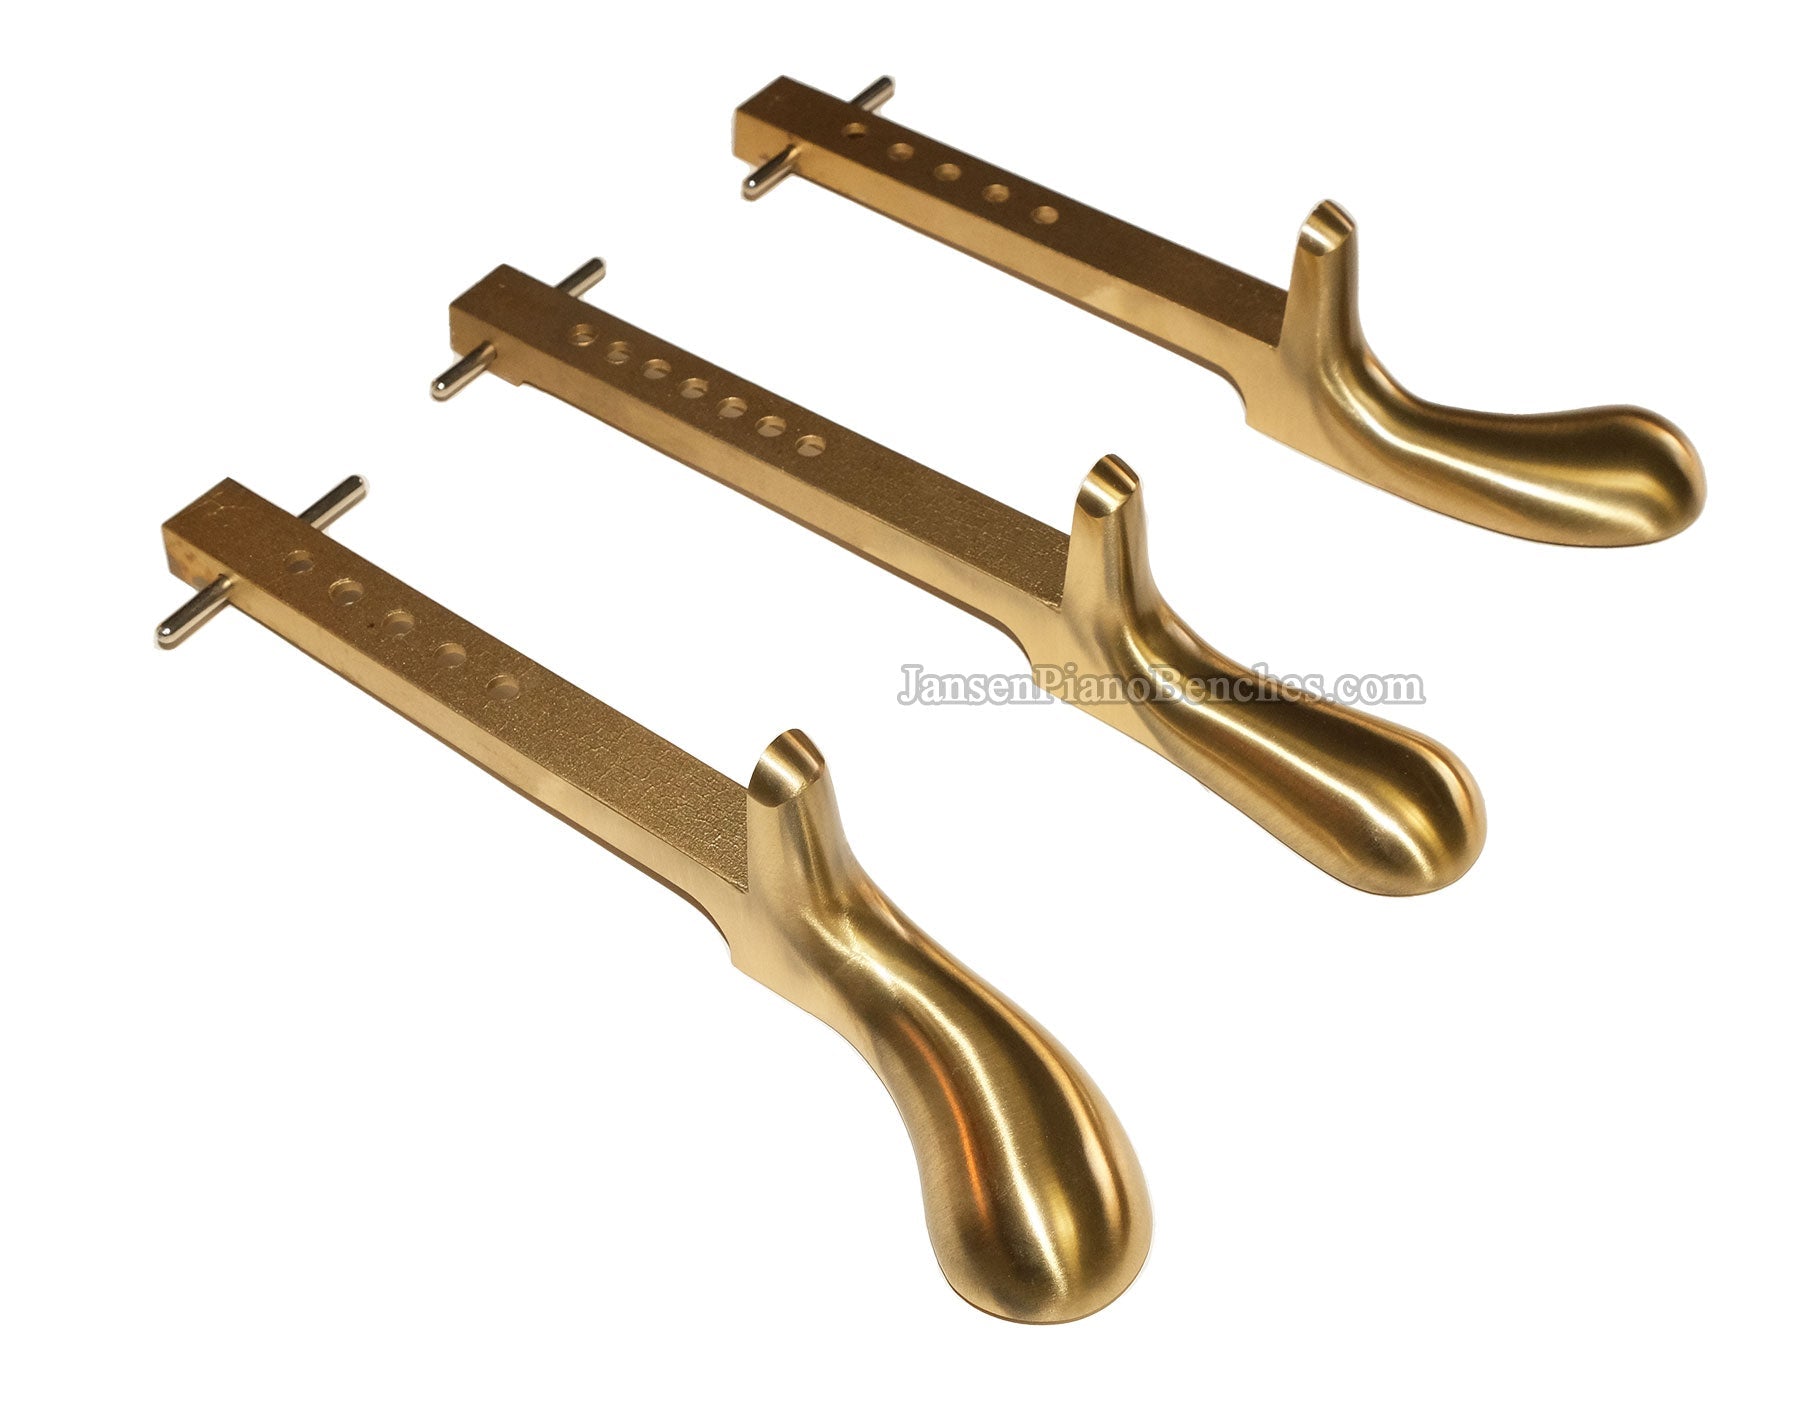 Upright Piano Pedals Solid Brass Model 1598 – Jansen Piano Benches